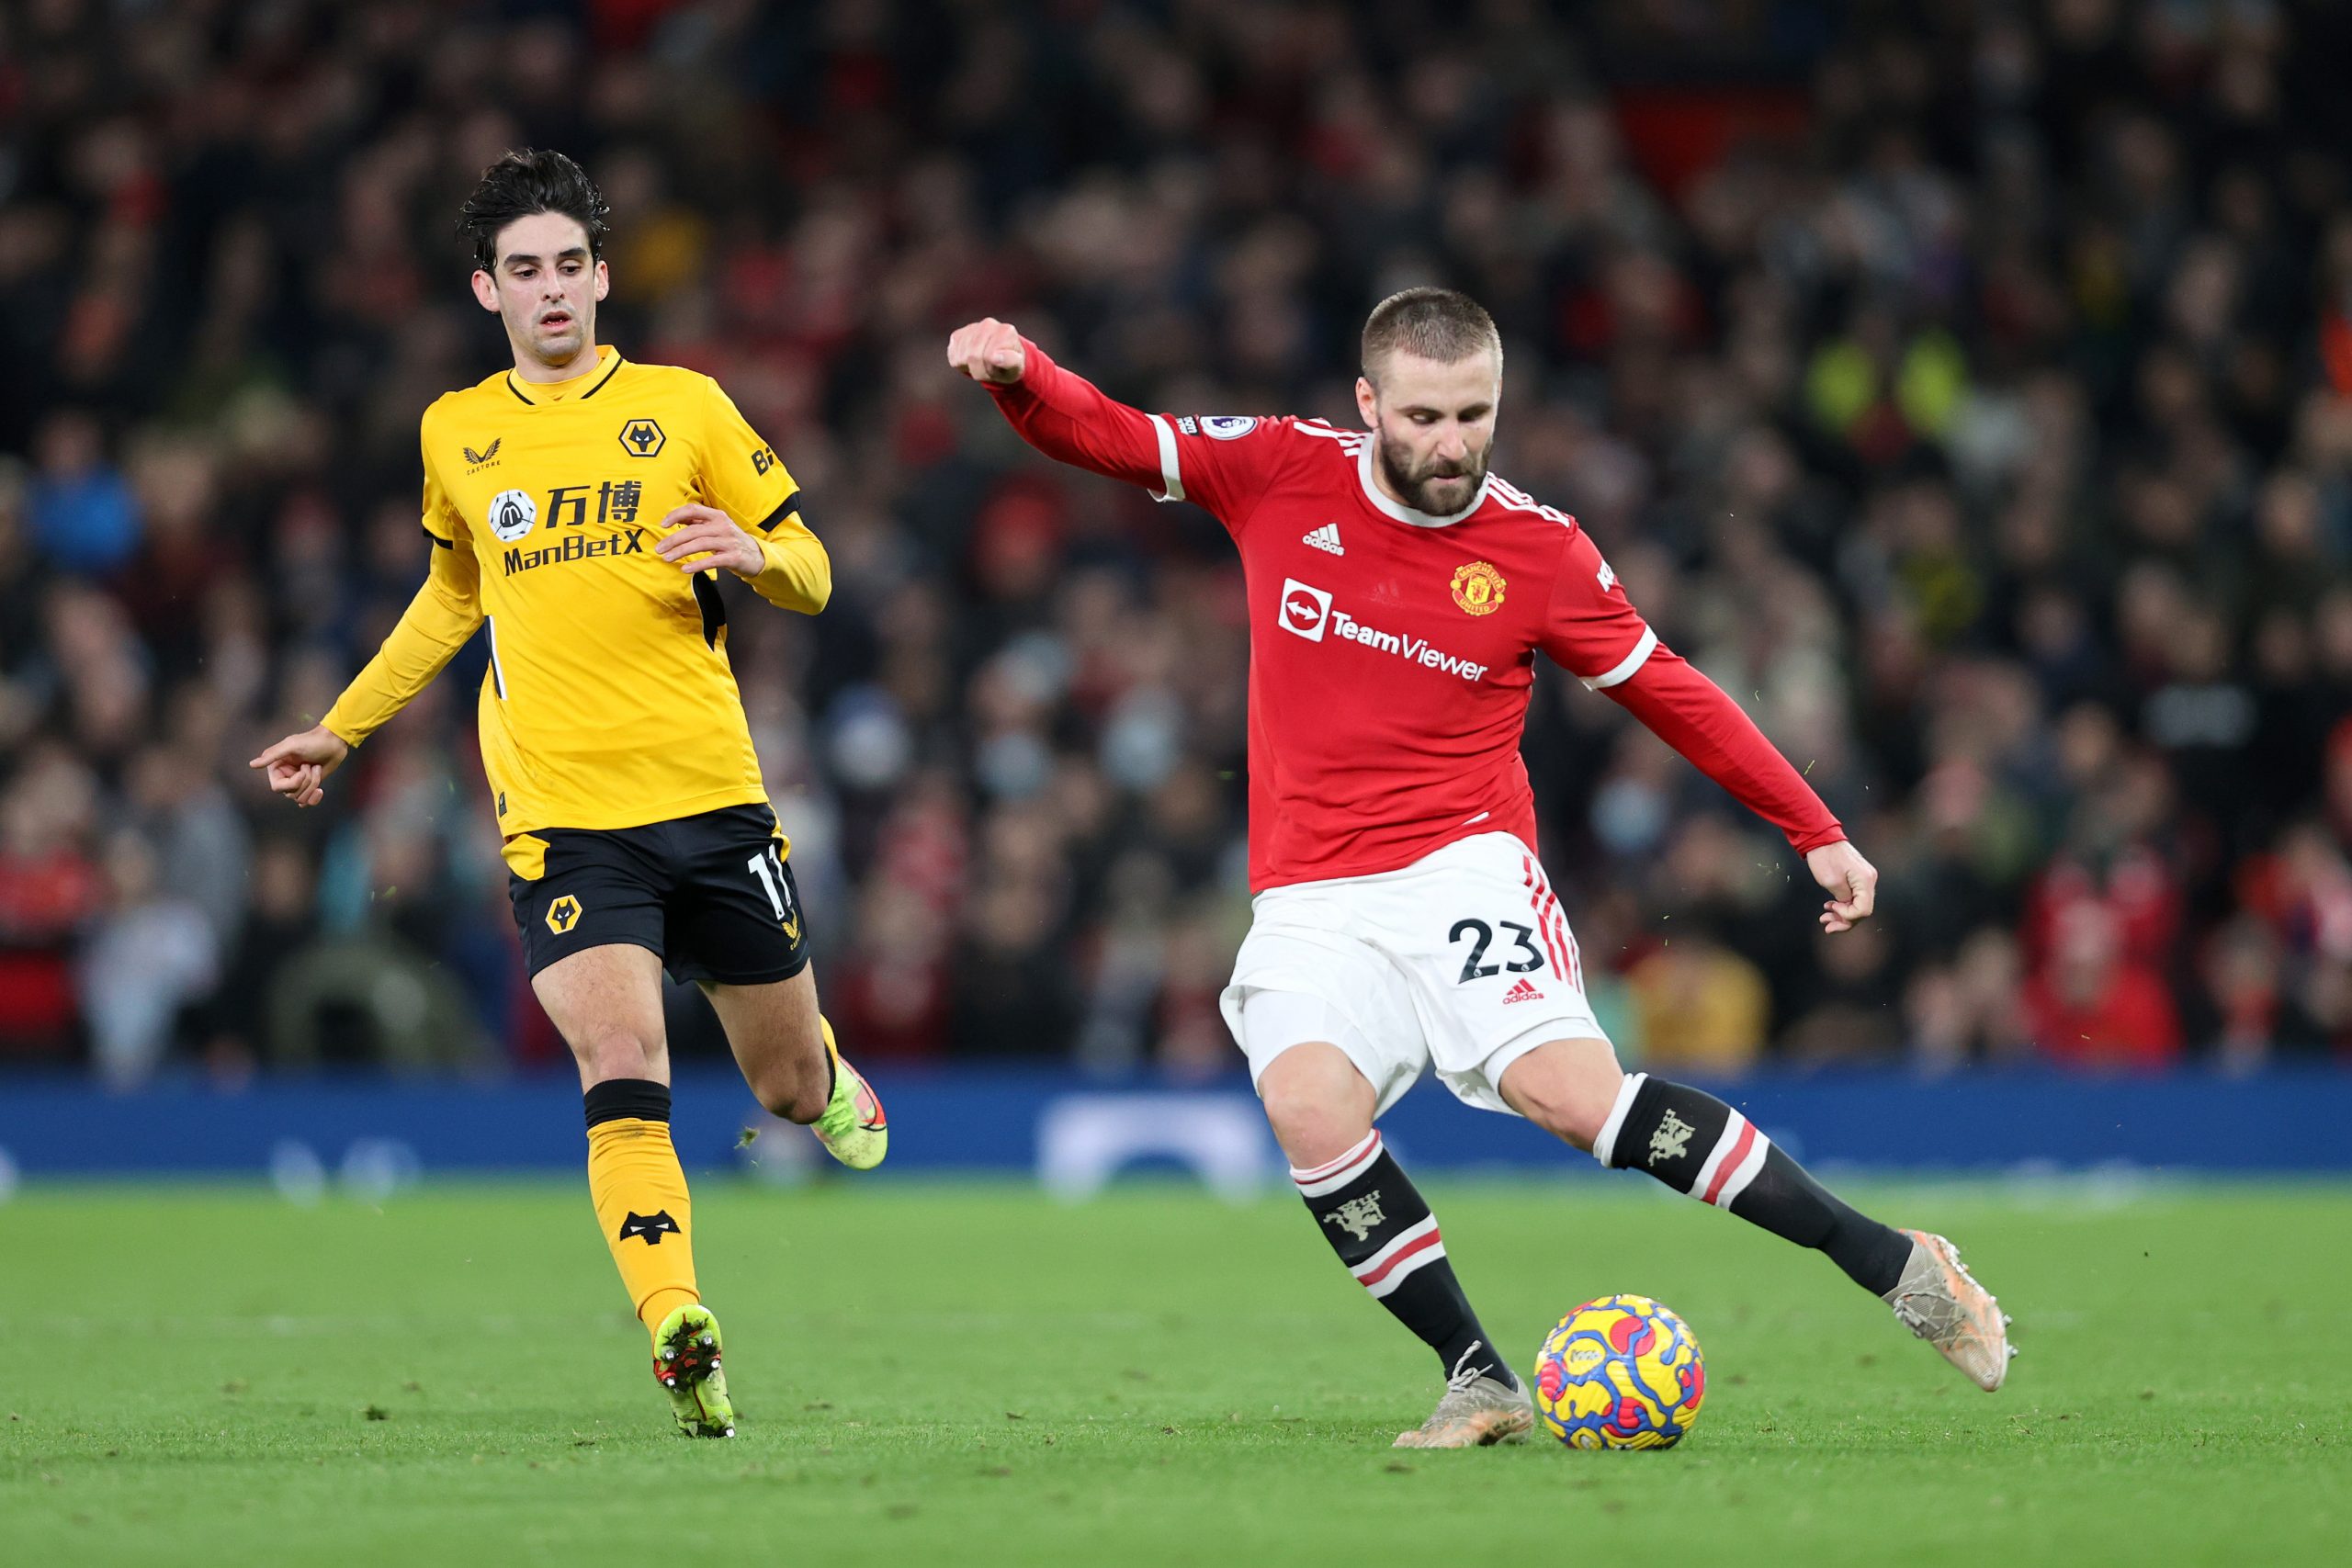 Manchester United suffered a 1-0 defeat to Wolves at Old Trafford.